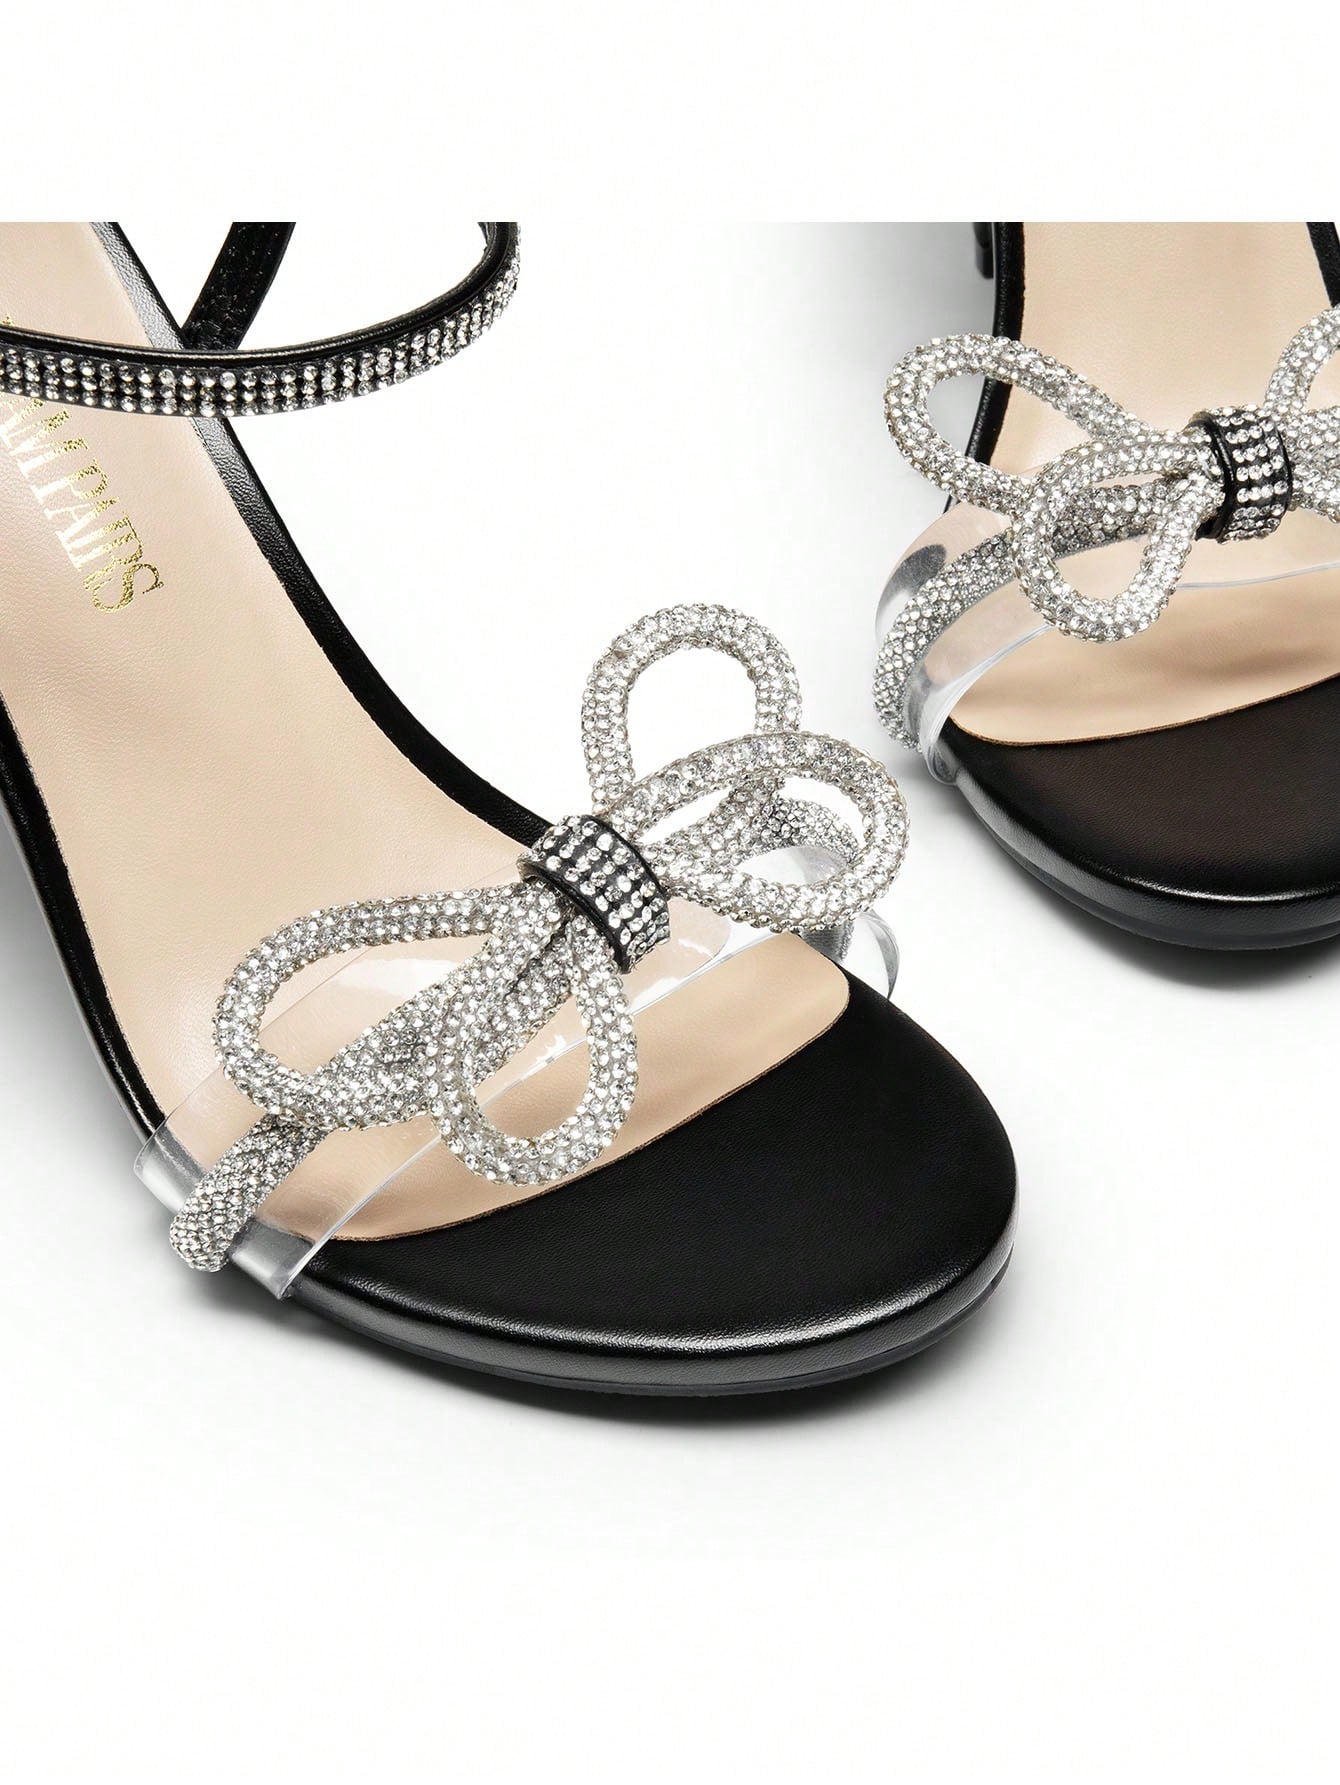 Women Double Bowknots Crystal Heeled Sandals, Open Toe Sparkly Stilettos Summer Sandals For Party Wedding Prom-Black-6